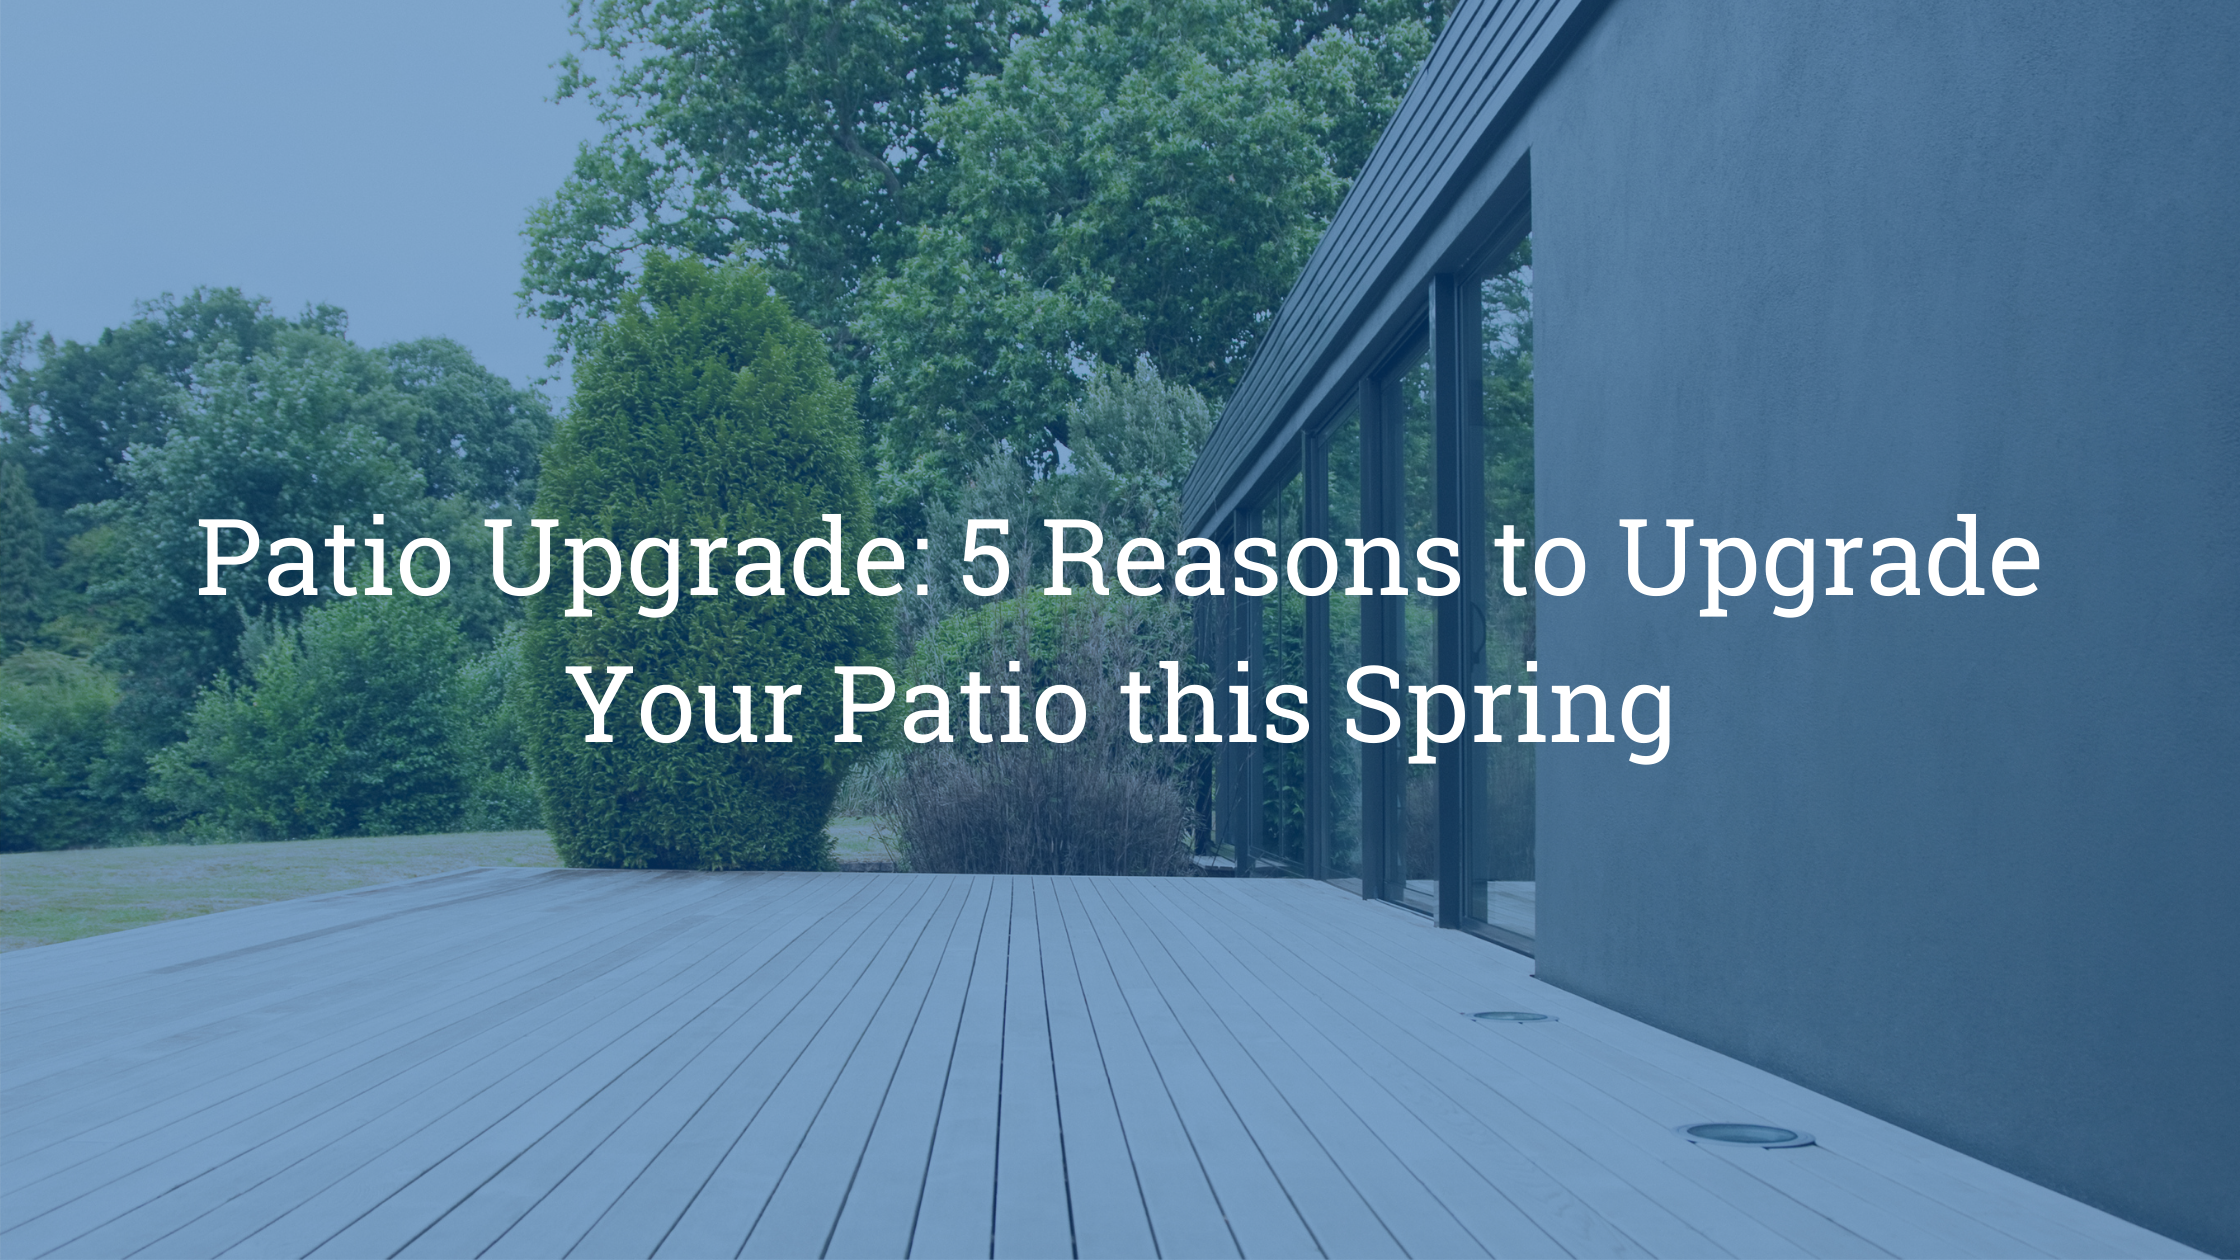 //www.cshelimeet.com/wp-content/uploads/2021/05/Patio-Upgrade_-5-Reasons-to-Upgrade-Your-Patio-this-Spring-1.png